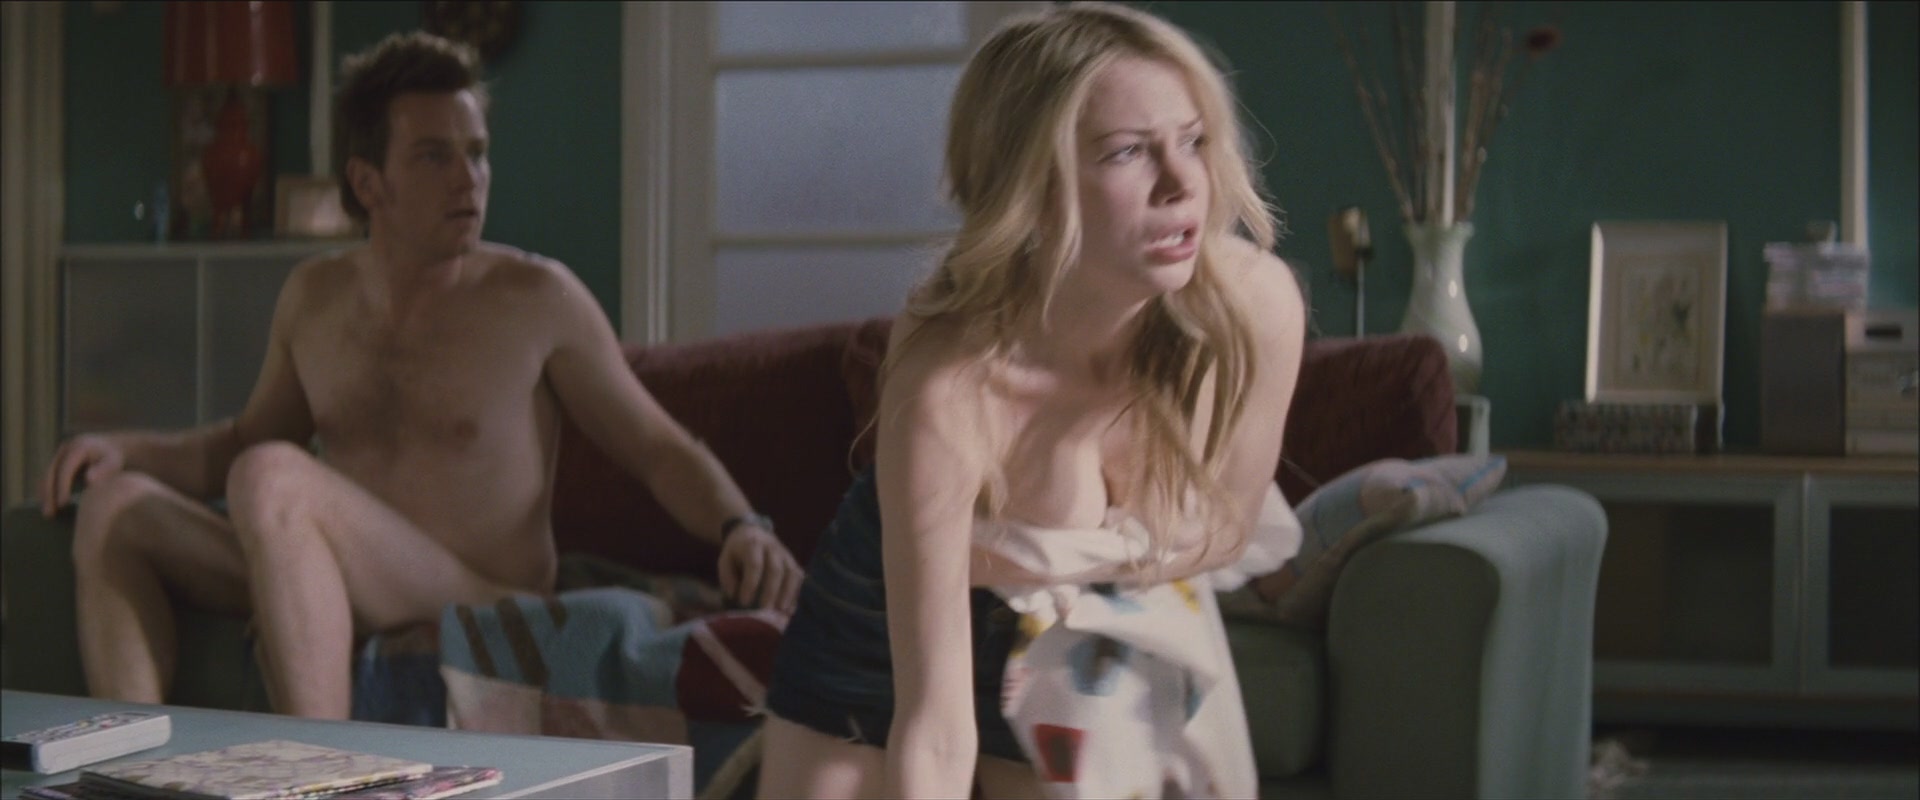 Naked Michelle Williams In Incendiary